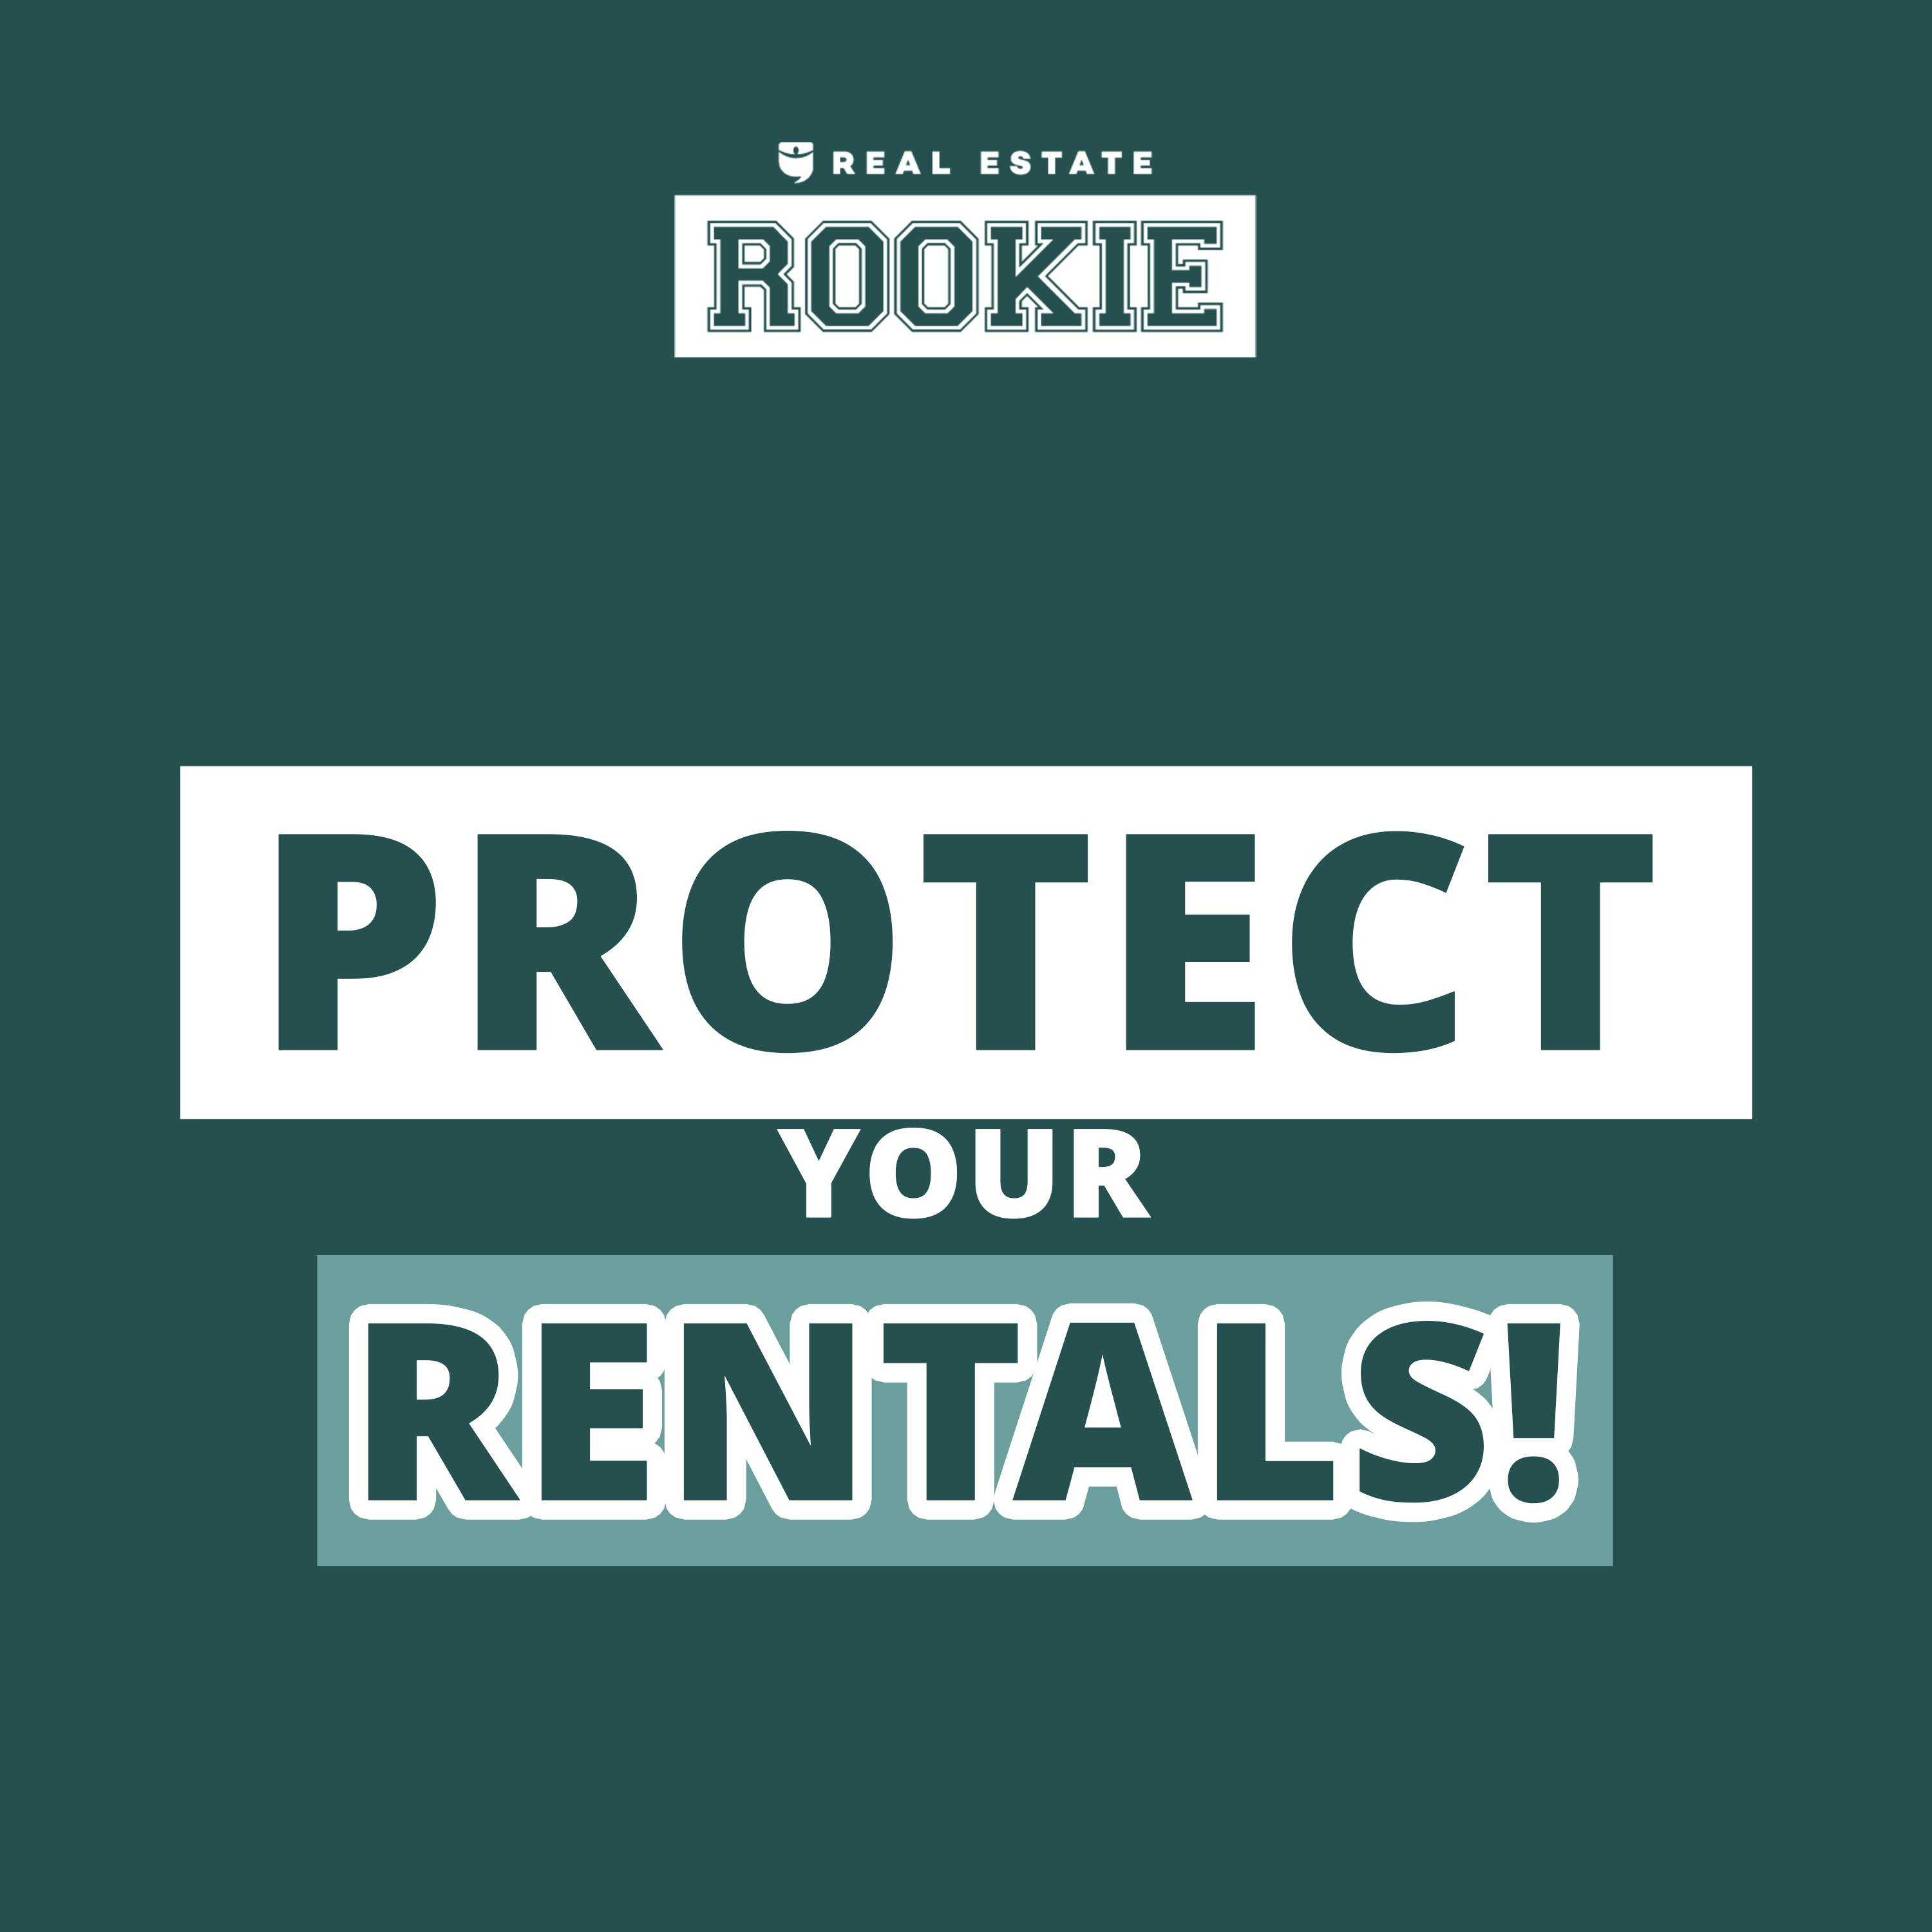 307: How to Protect Your Rental from Fires, Floods, Lawsuits, and Liability